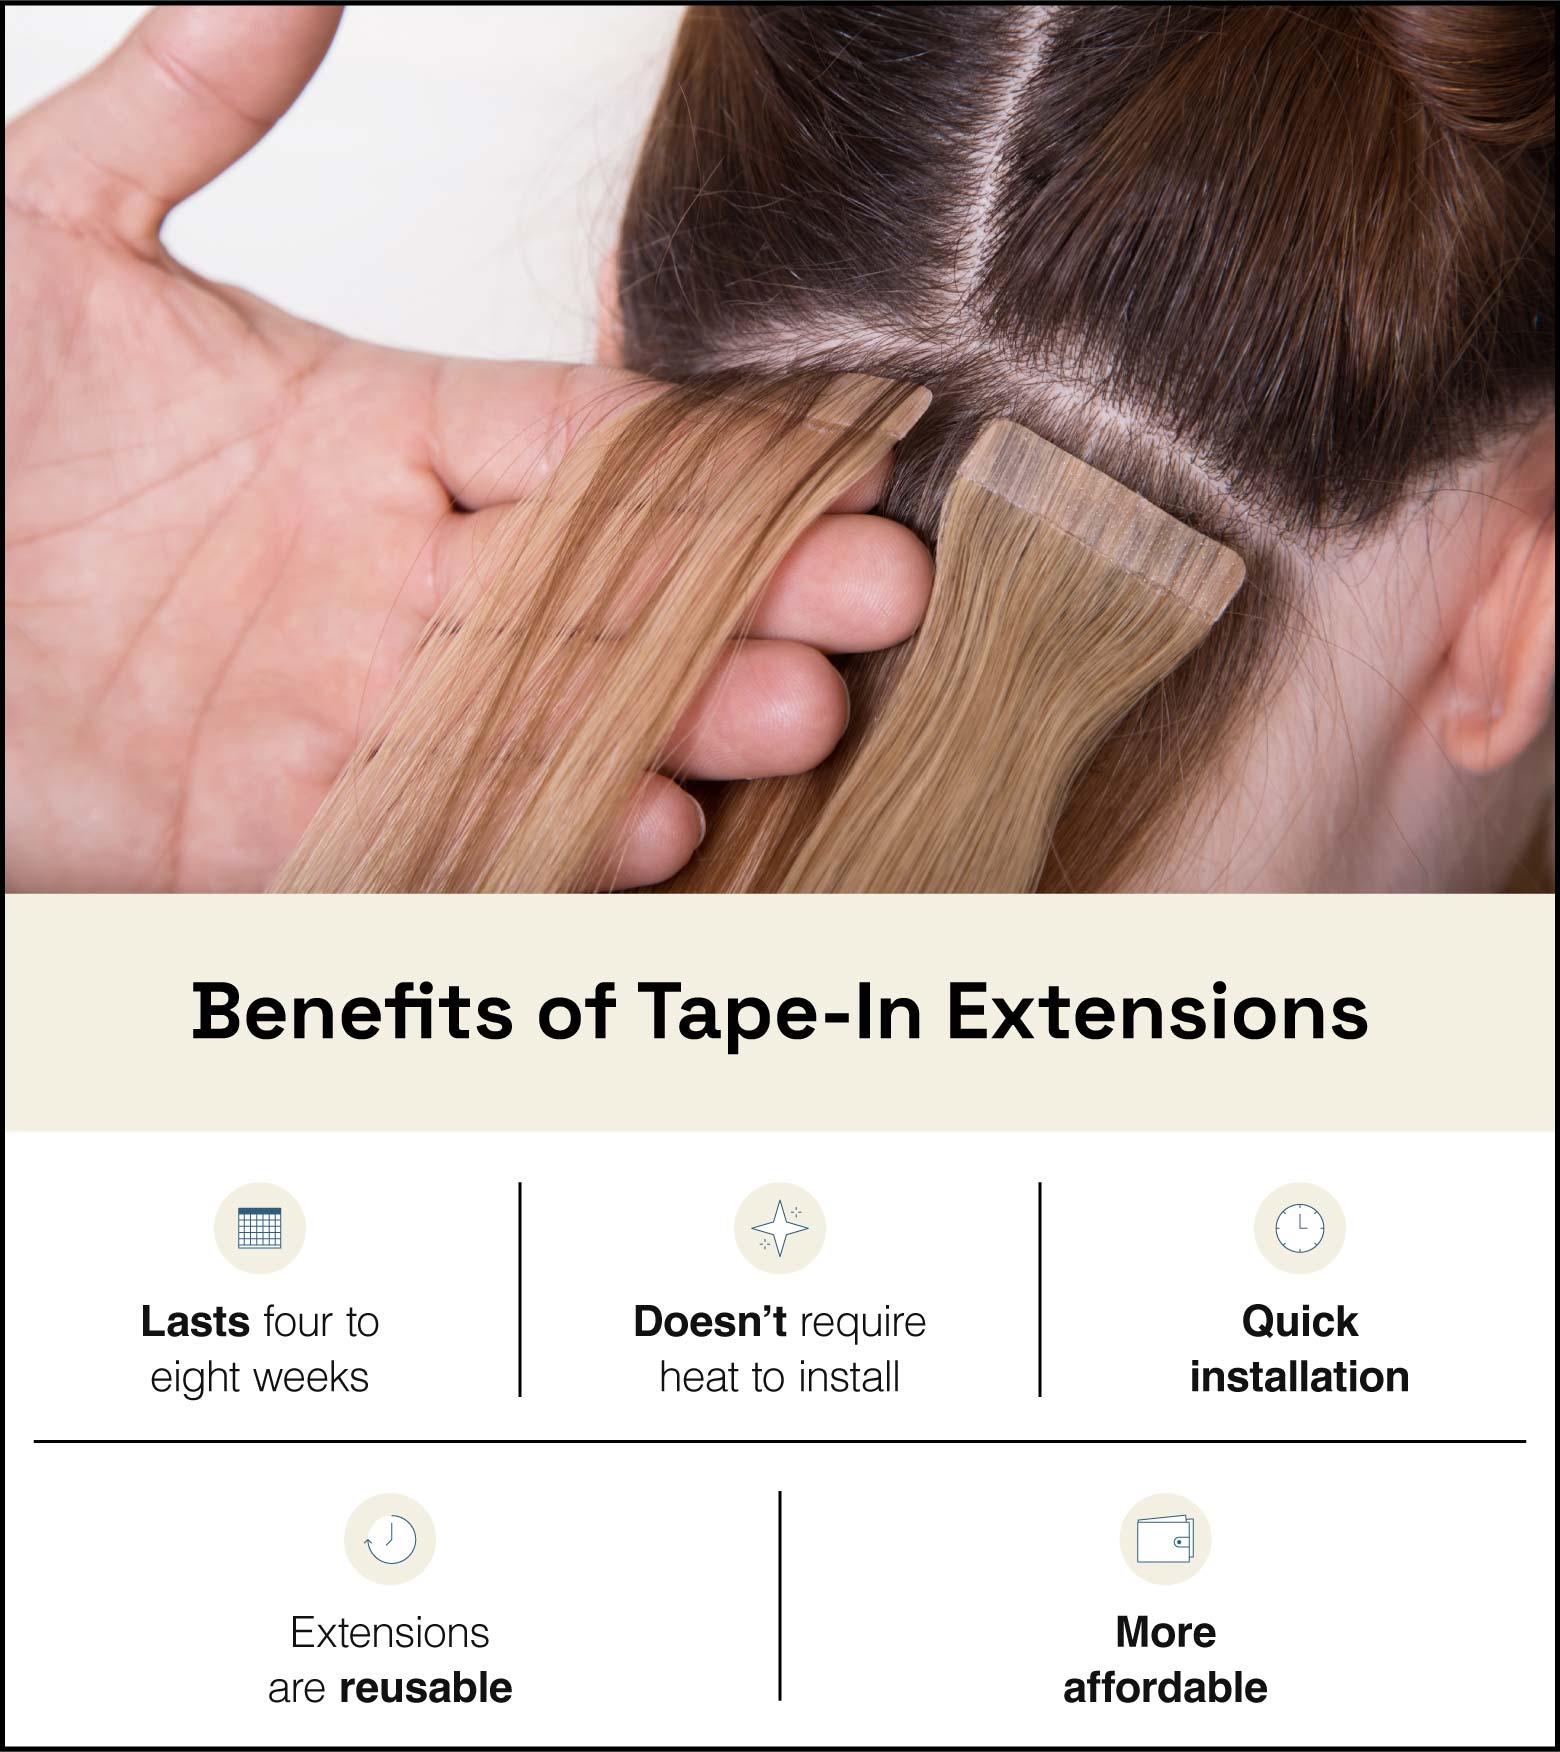 Image shows of tape-in extension application with text summarizing their benefits.